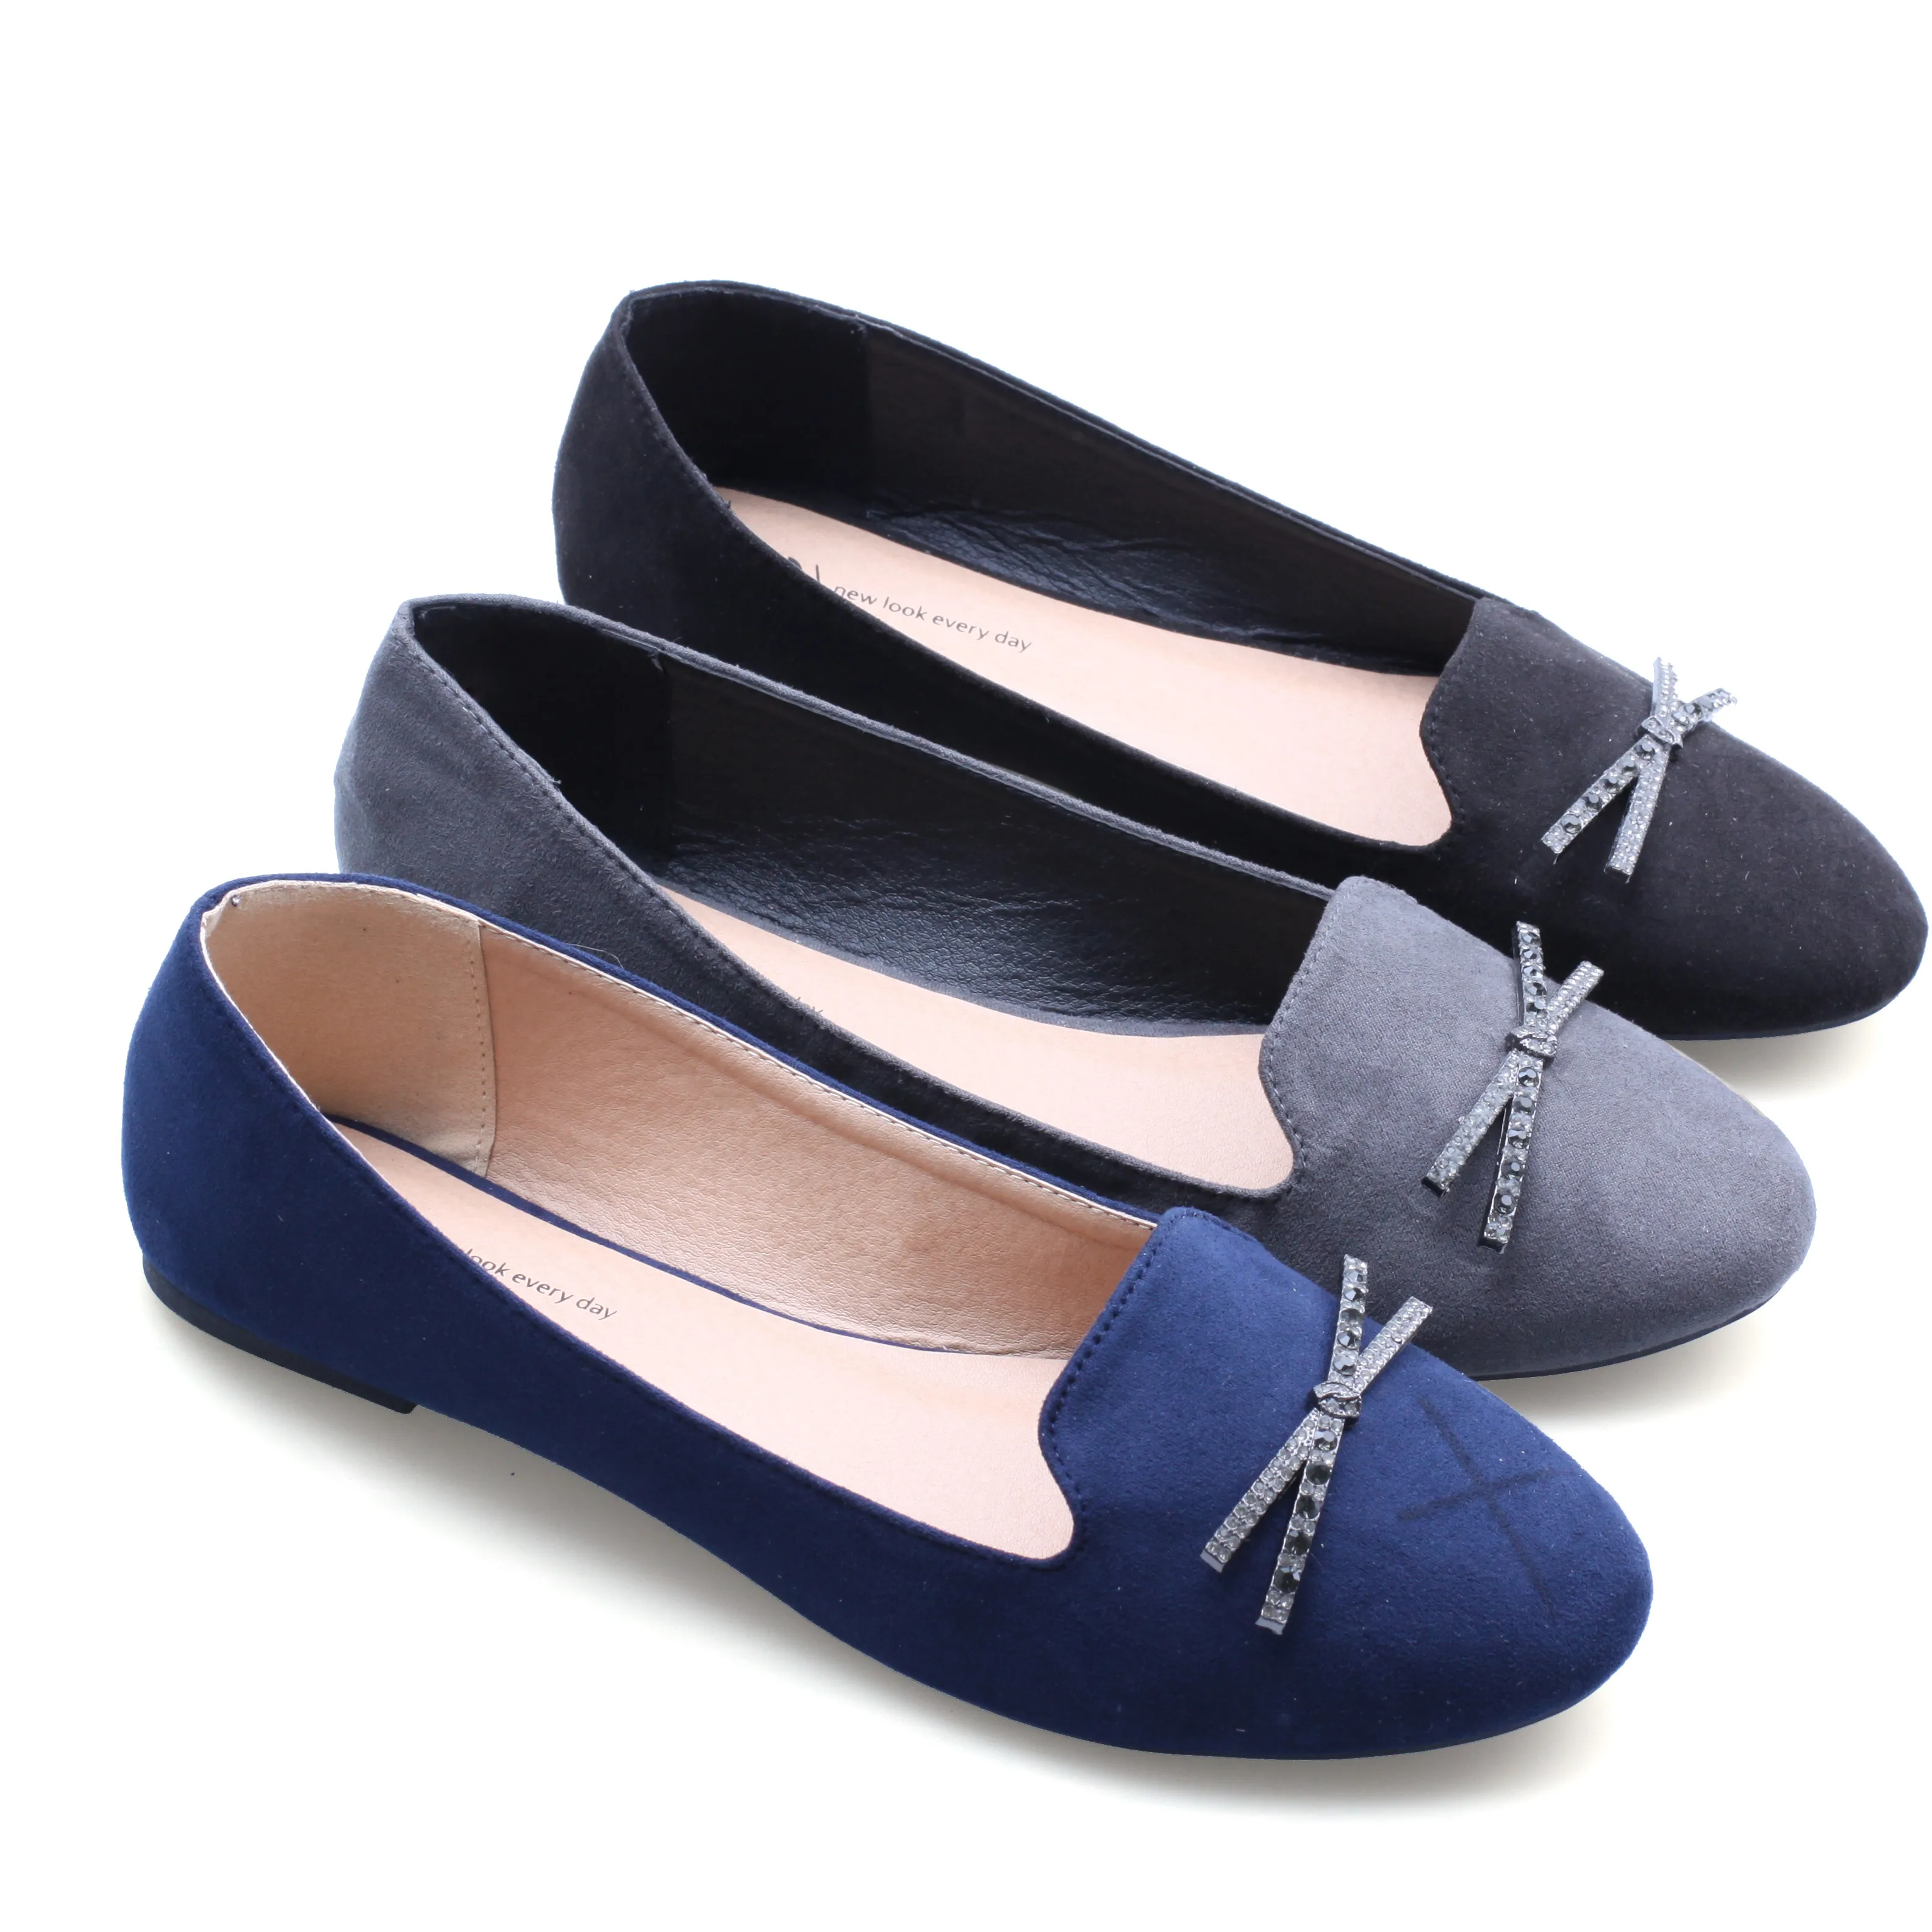 

The fashion flat shoes jewelry buckle microfiber upper slip on soft insole women causal shoes, Black/grey/navy